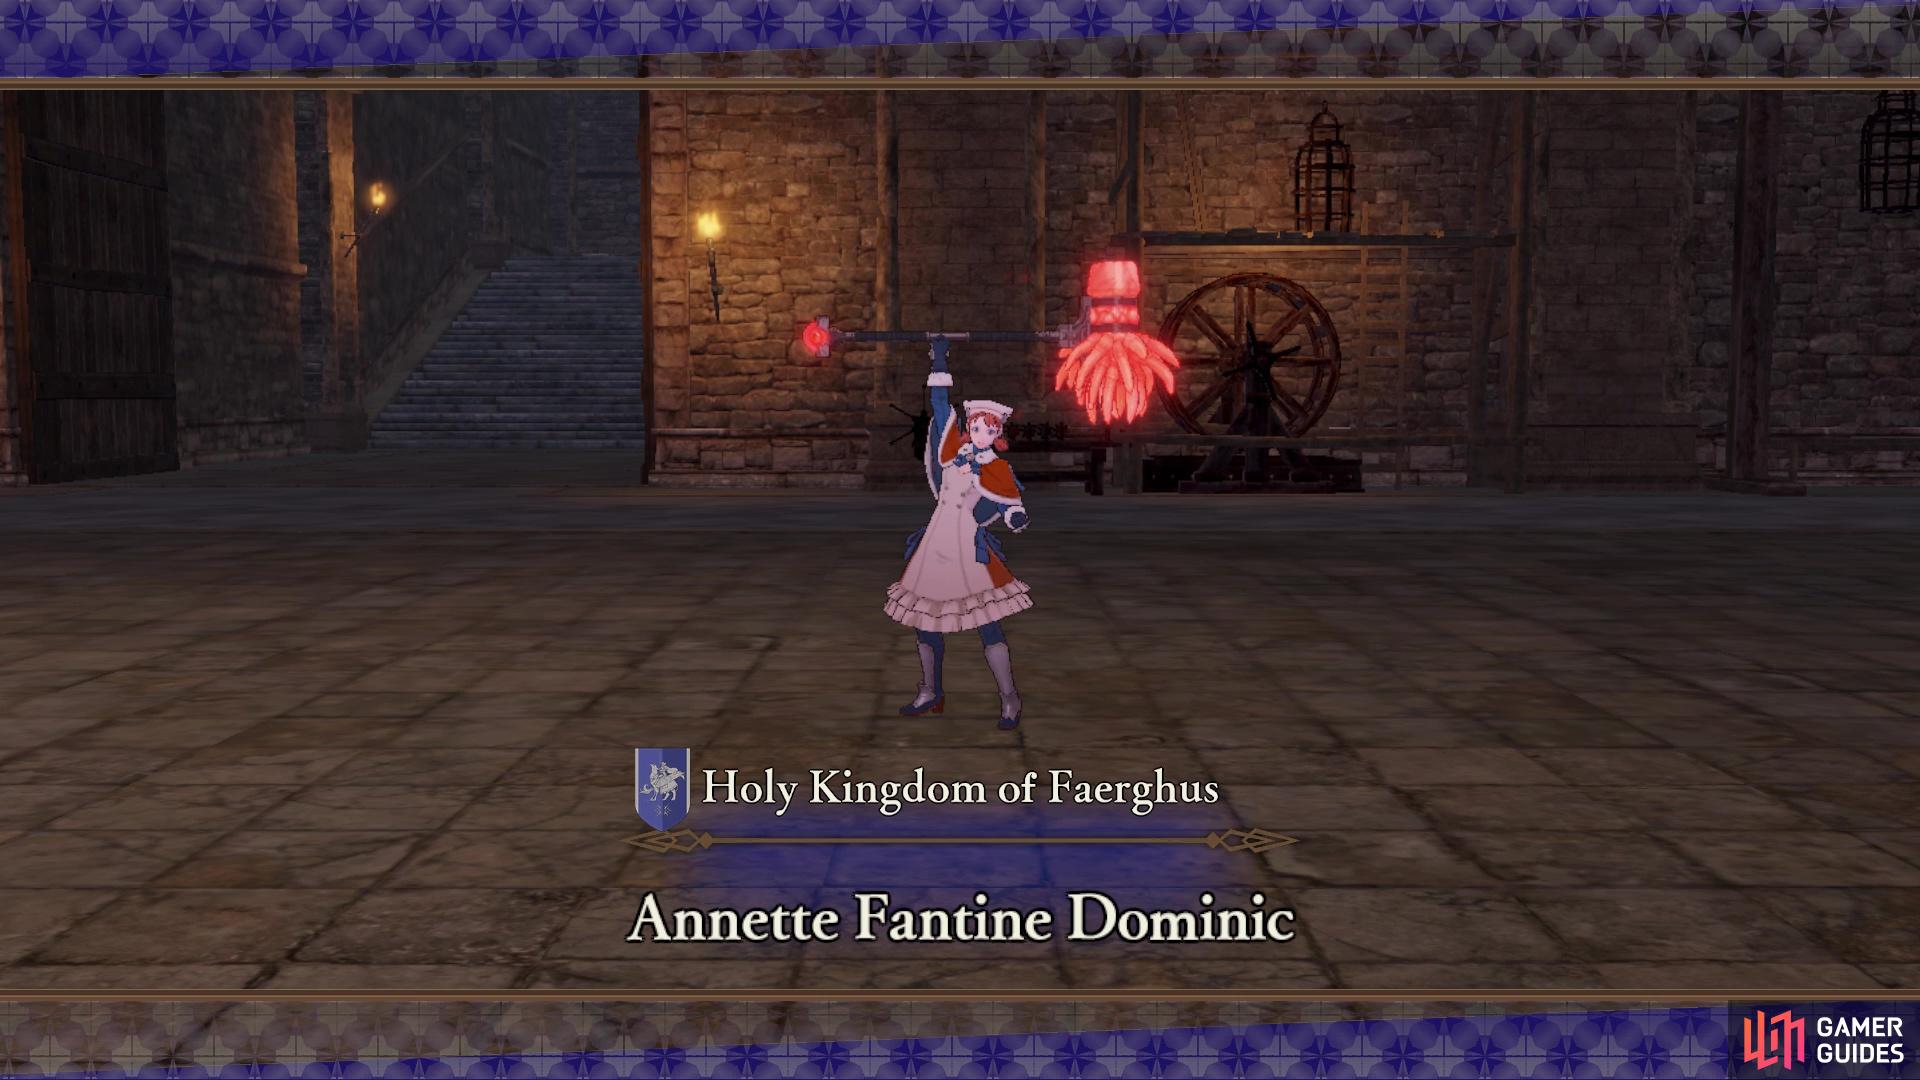 Taking this path will make Annette spawn in that stronghold there